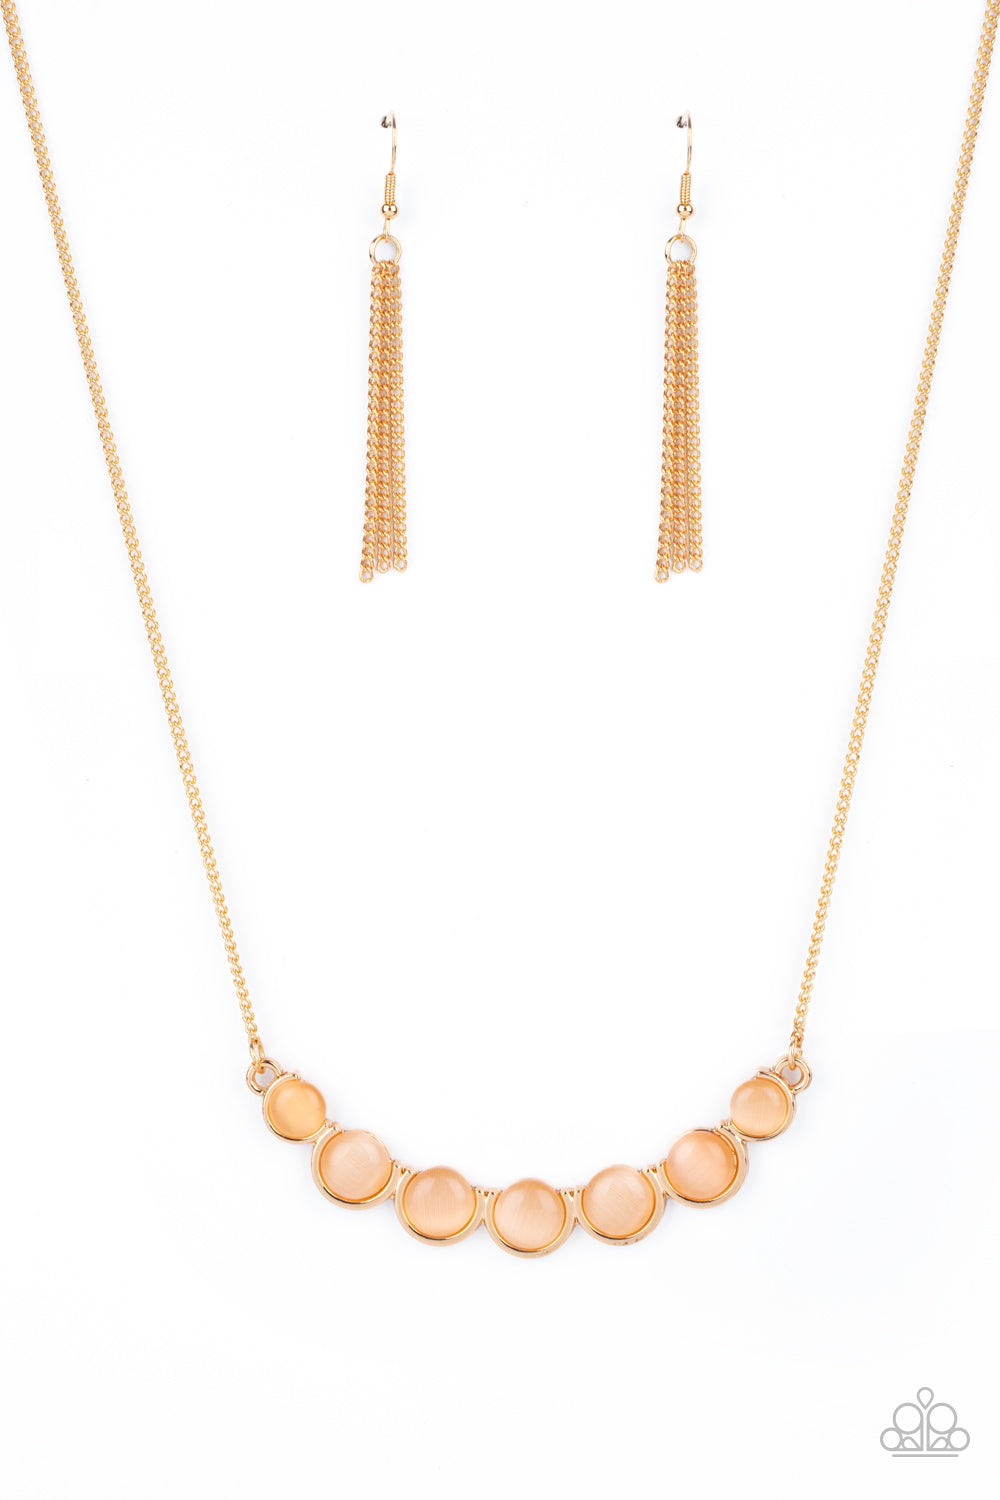 Serenely Scalloped - Gold Necklace - Paparazzi Accessories